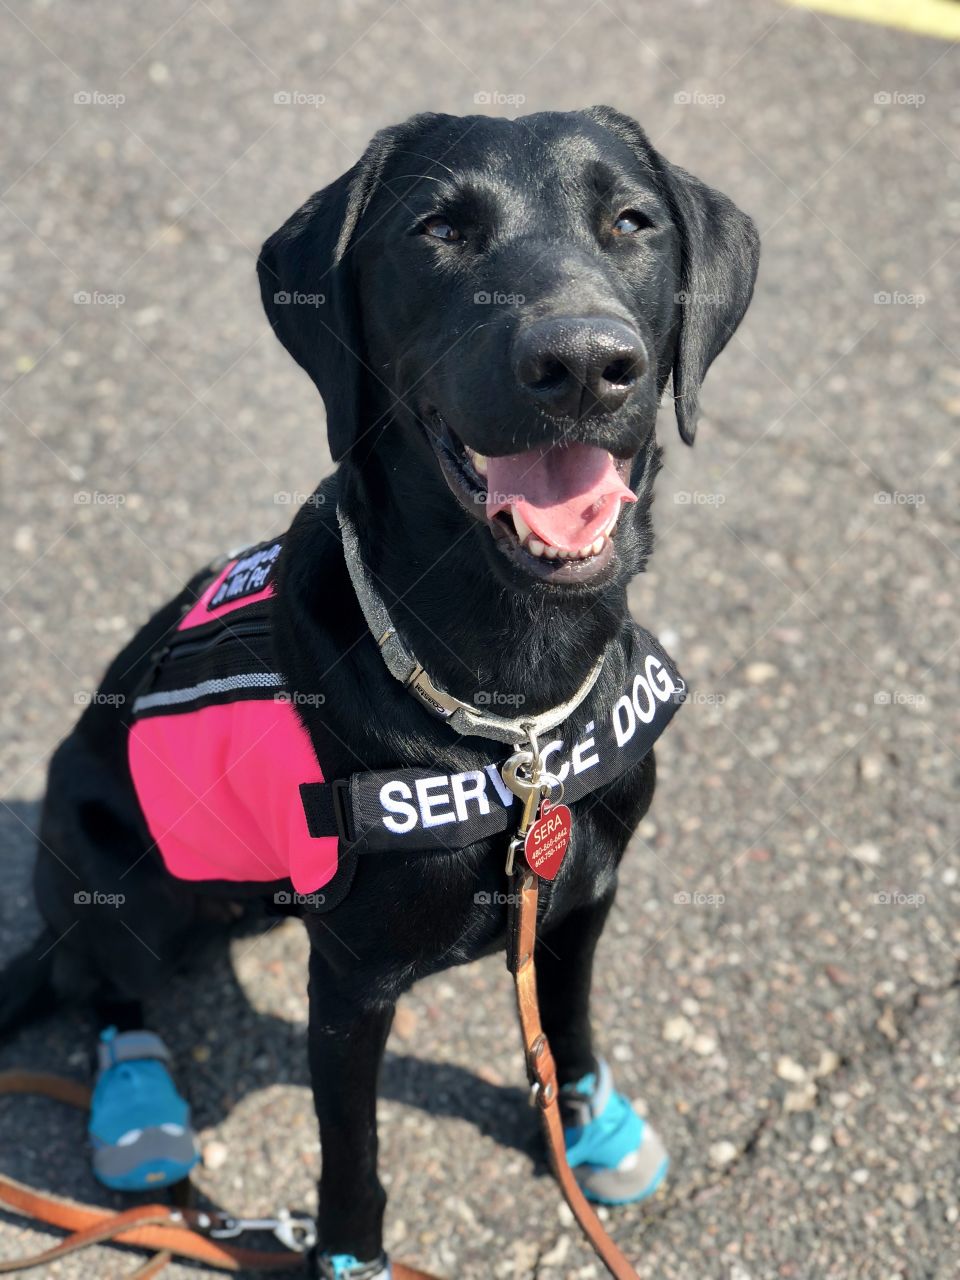 Henderson’s Sweet Serendipity CGC CGCA “Sera” - Sera, a 1.5 year old black Labrador Retriever, is a Service Dog in Training. She is wearing shoes or ‘booties’ to protect her paws from the hot asphalt here in Arizona. 